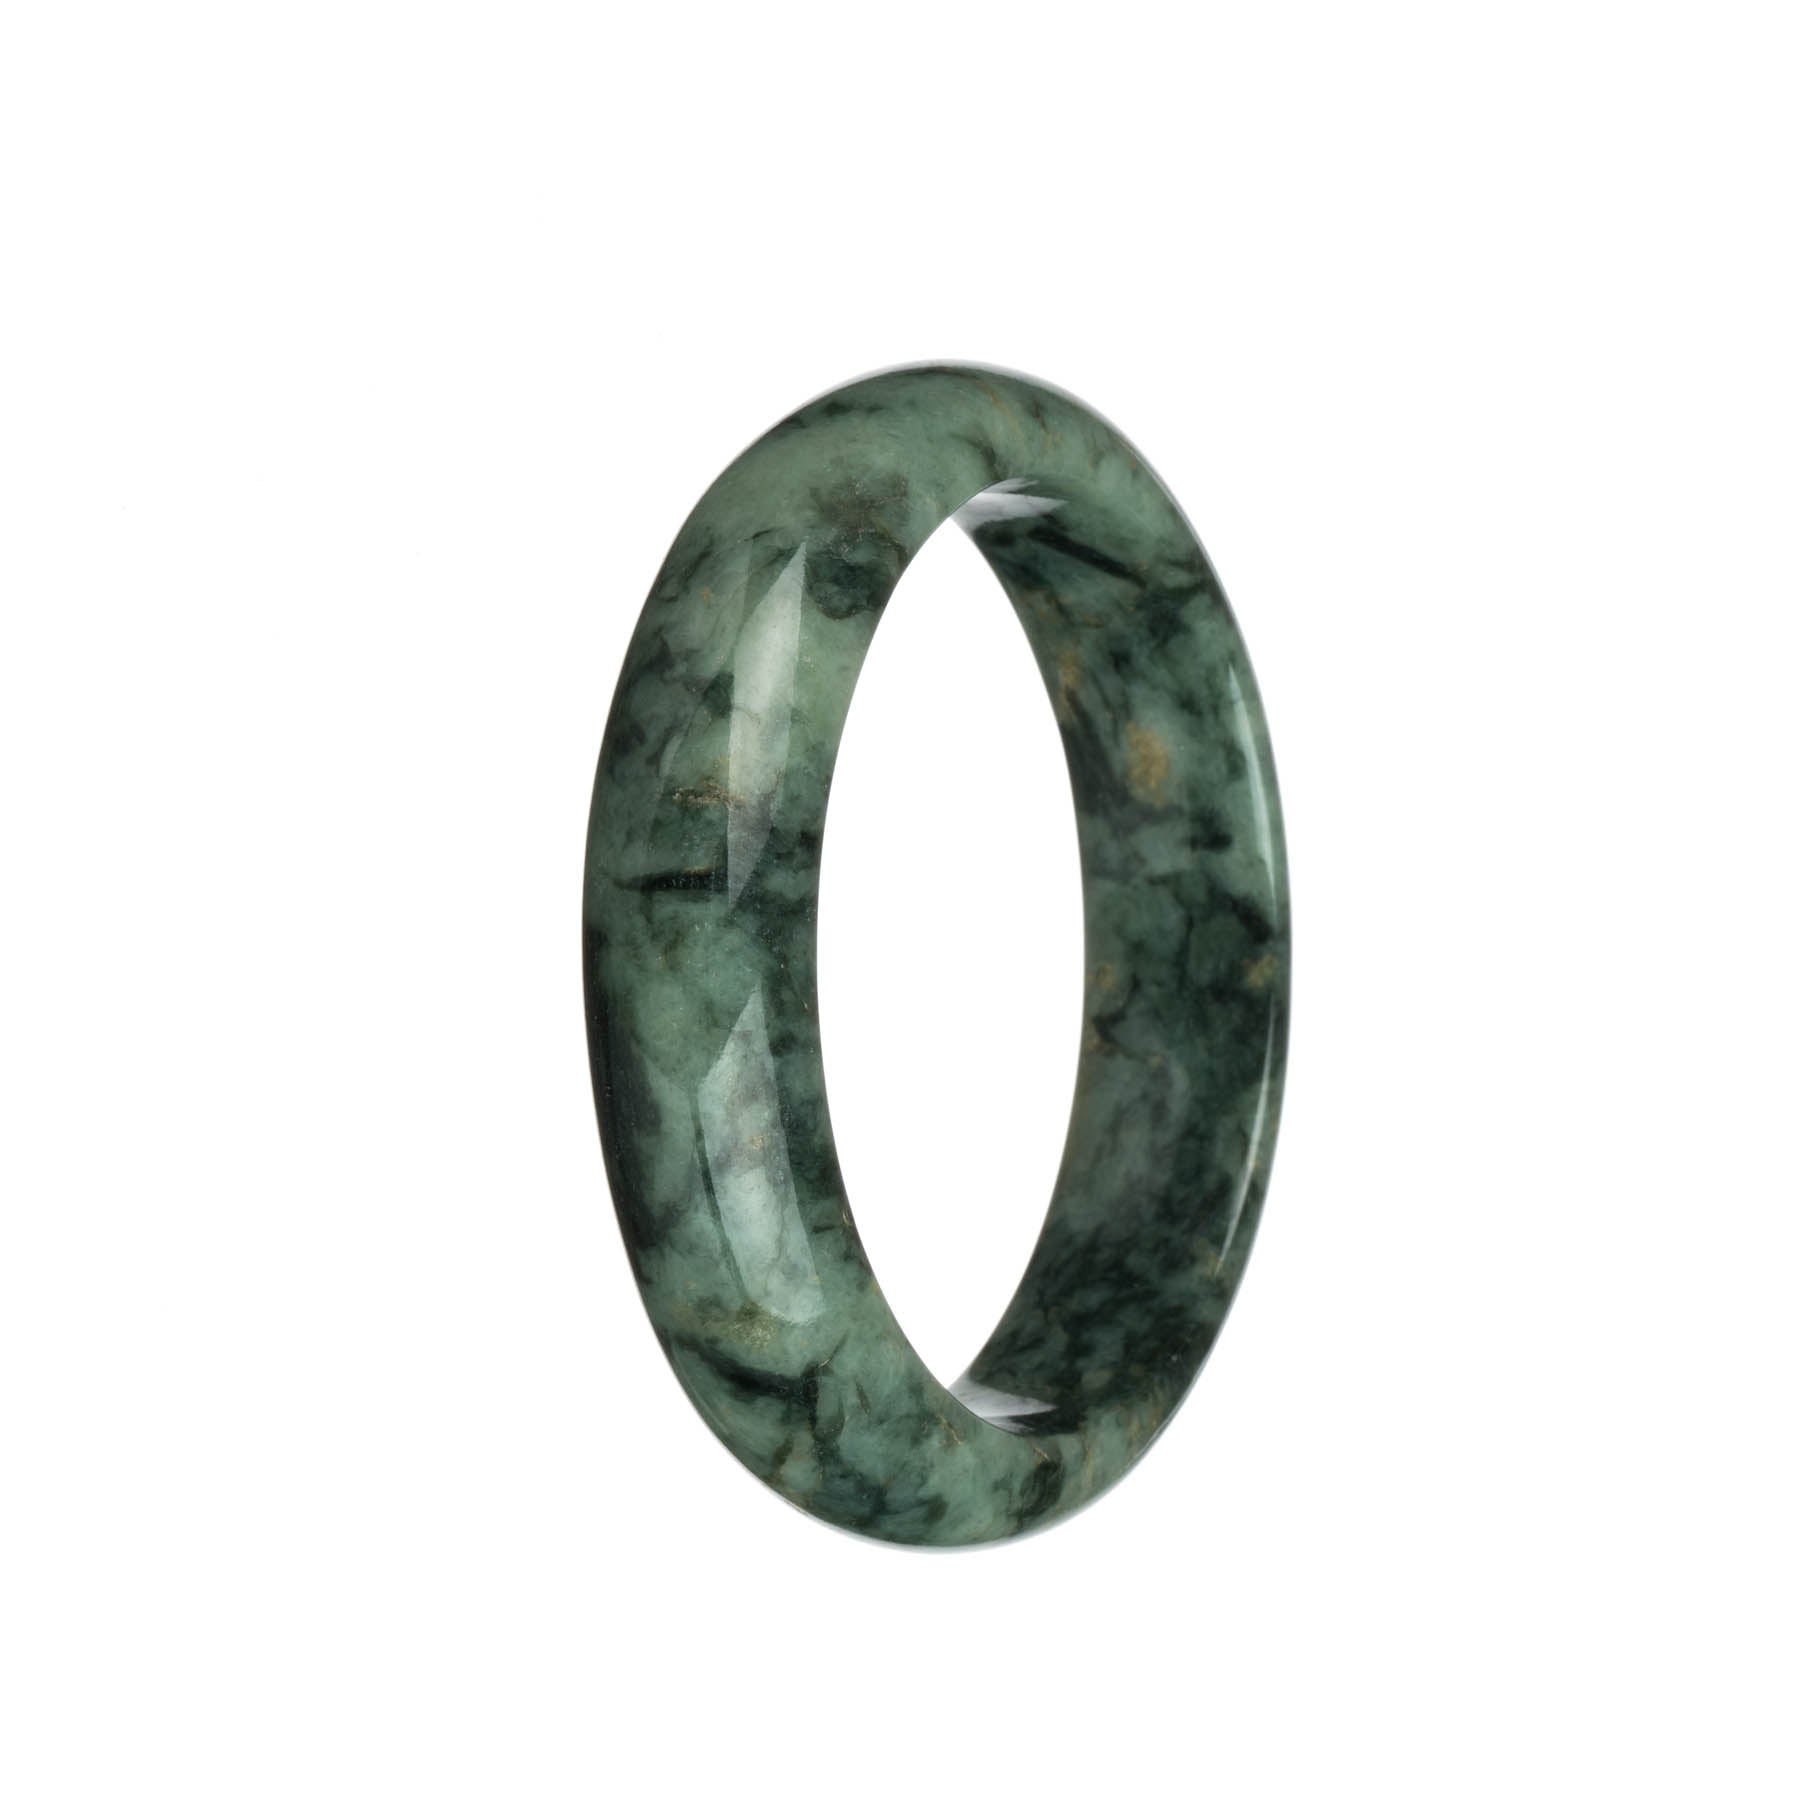 Genuine Grade A Green with Dark Green and Light Brown Patterns Traditional Jade Bracelet - 60mm Half Moon